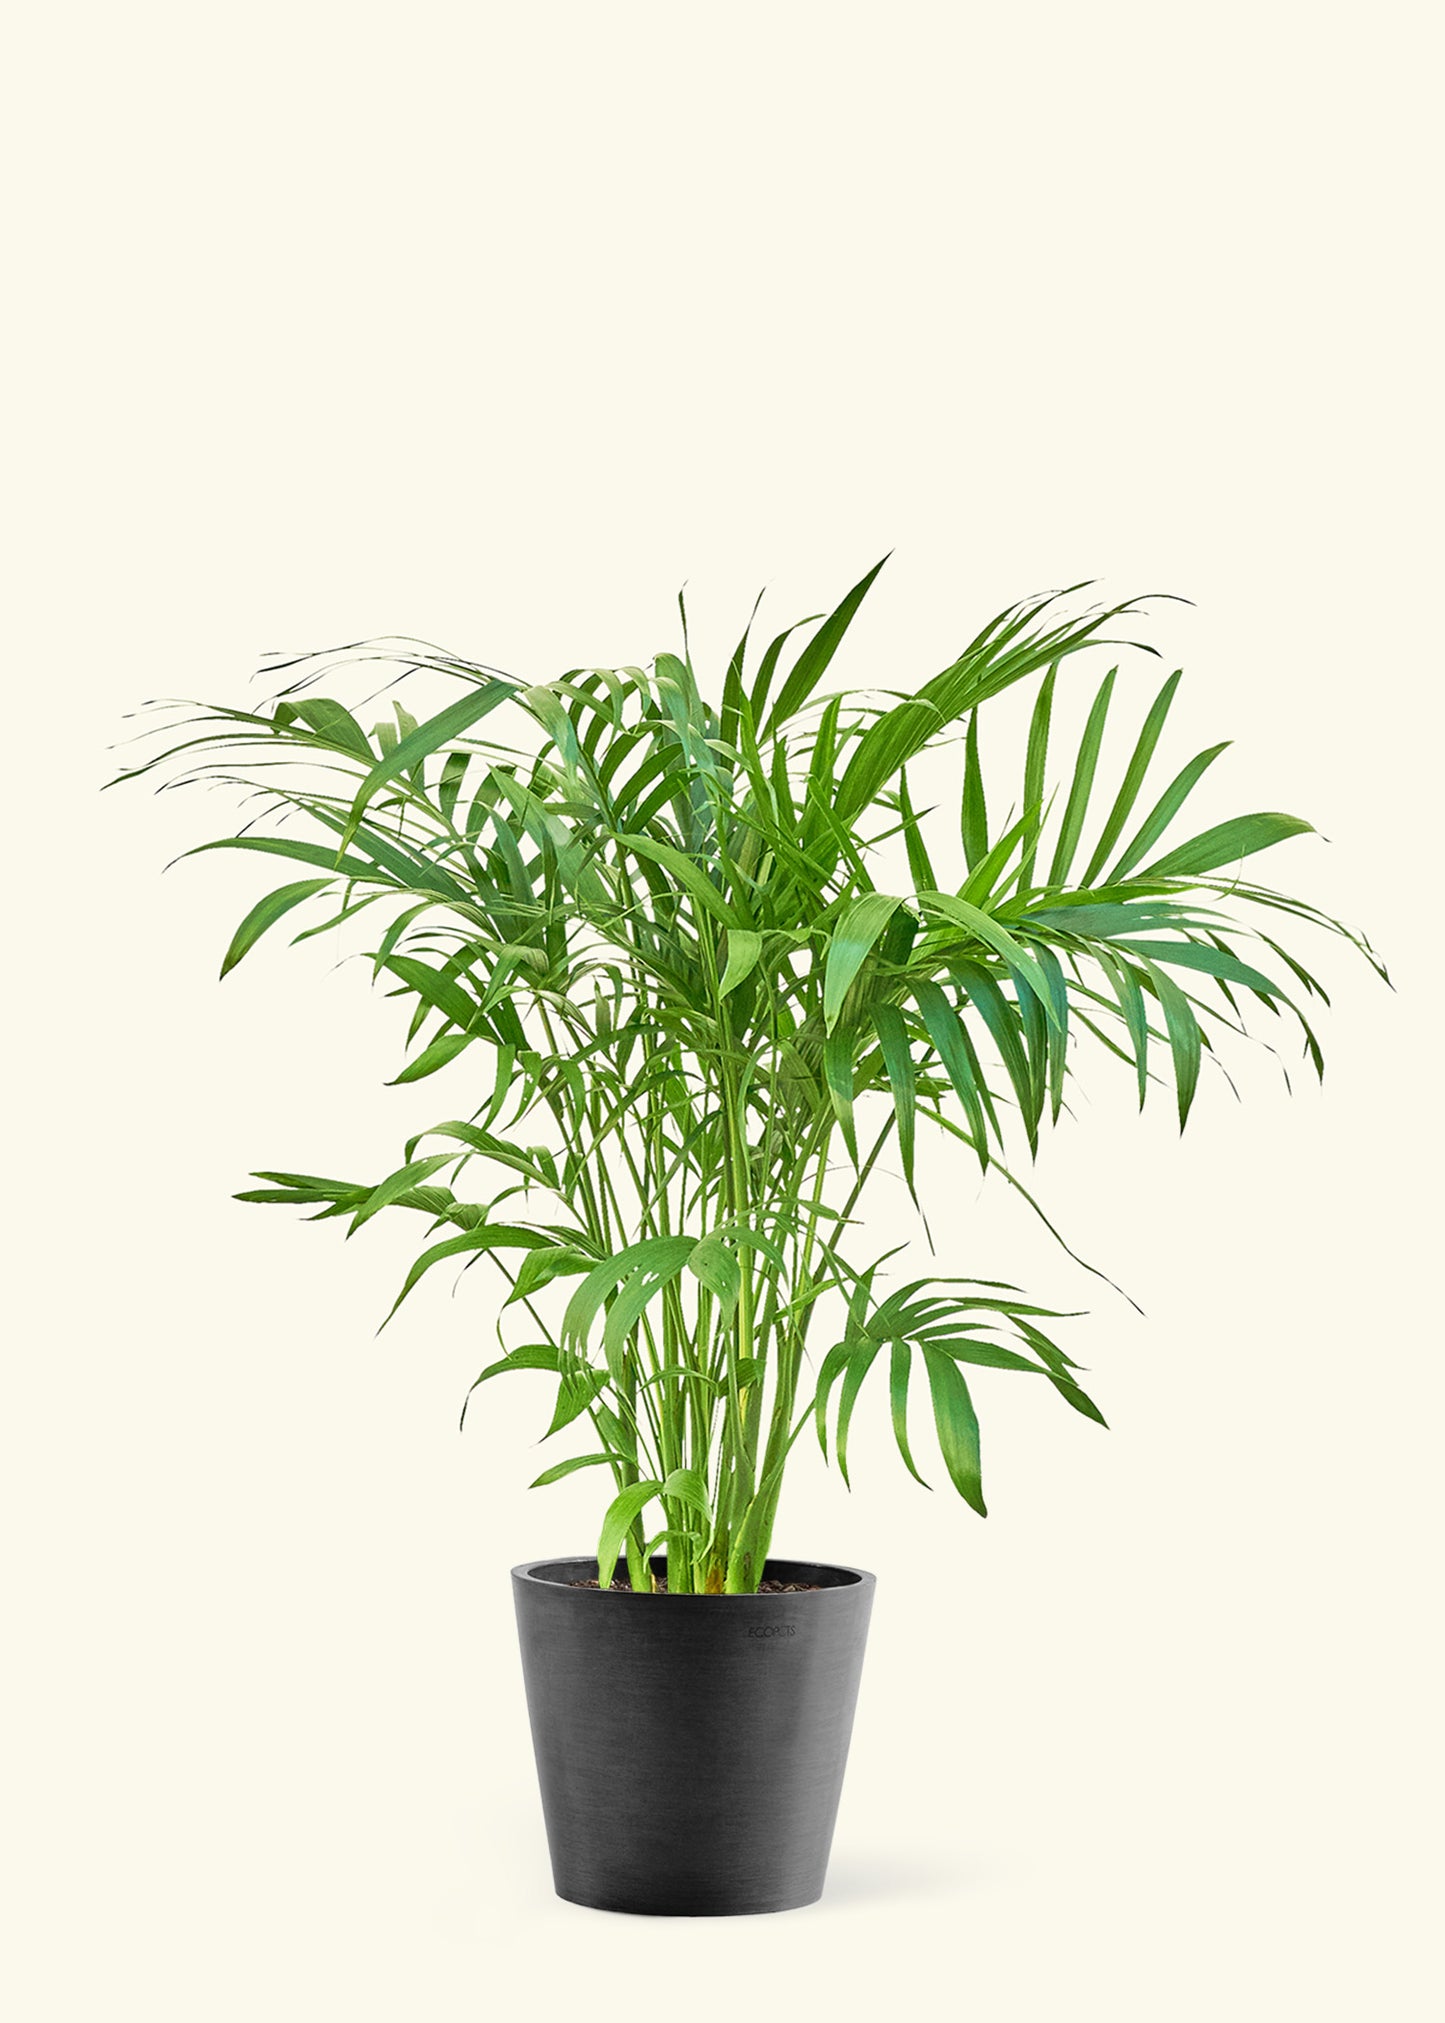 Large Bamboo Palm Plant in a black pot.